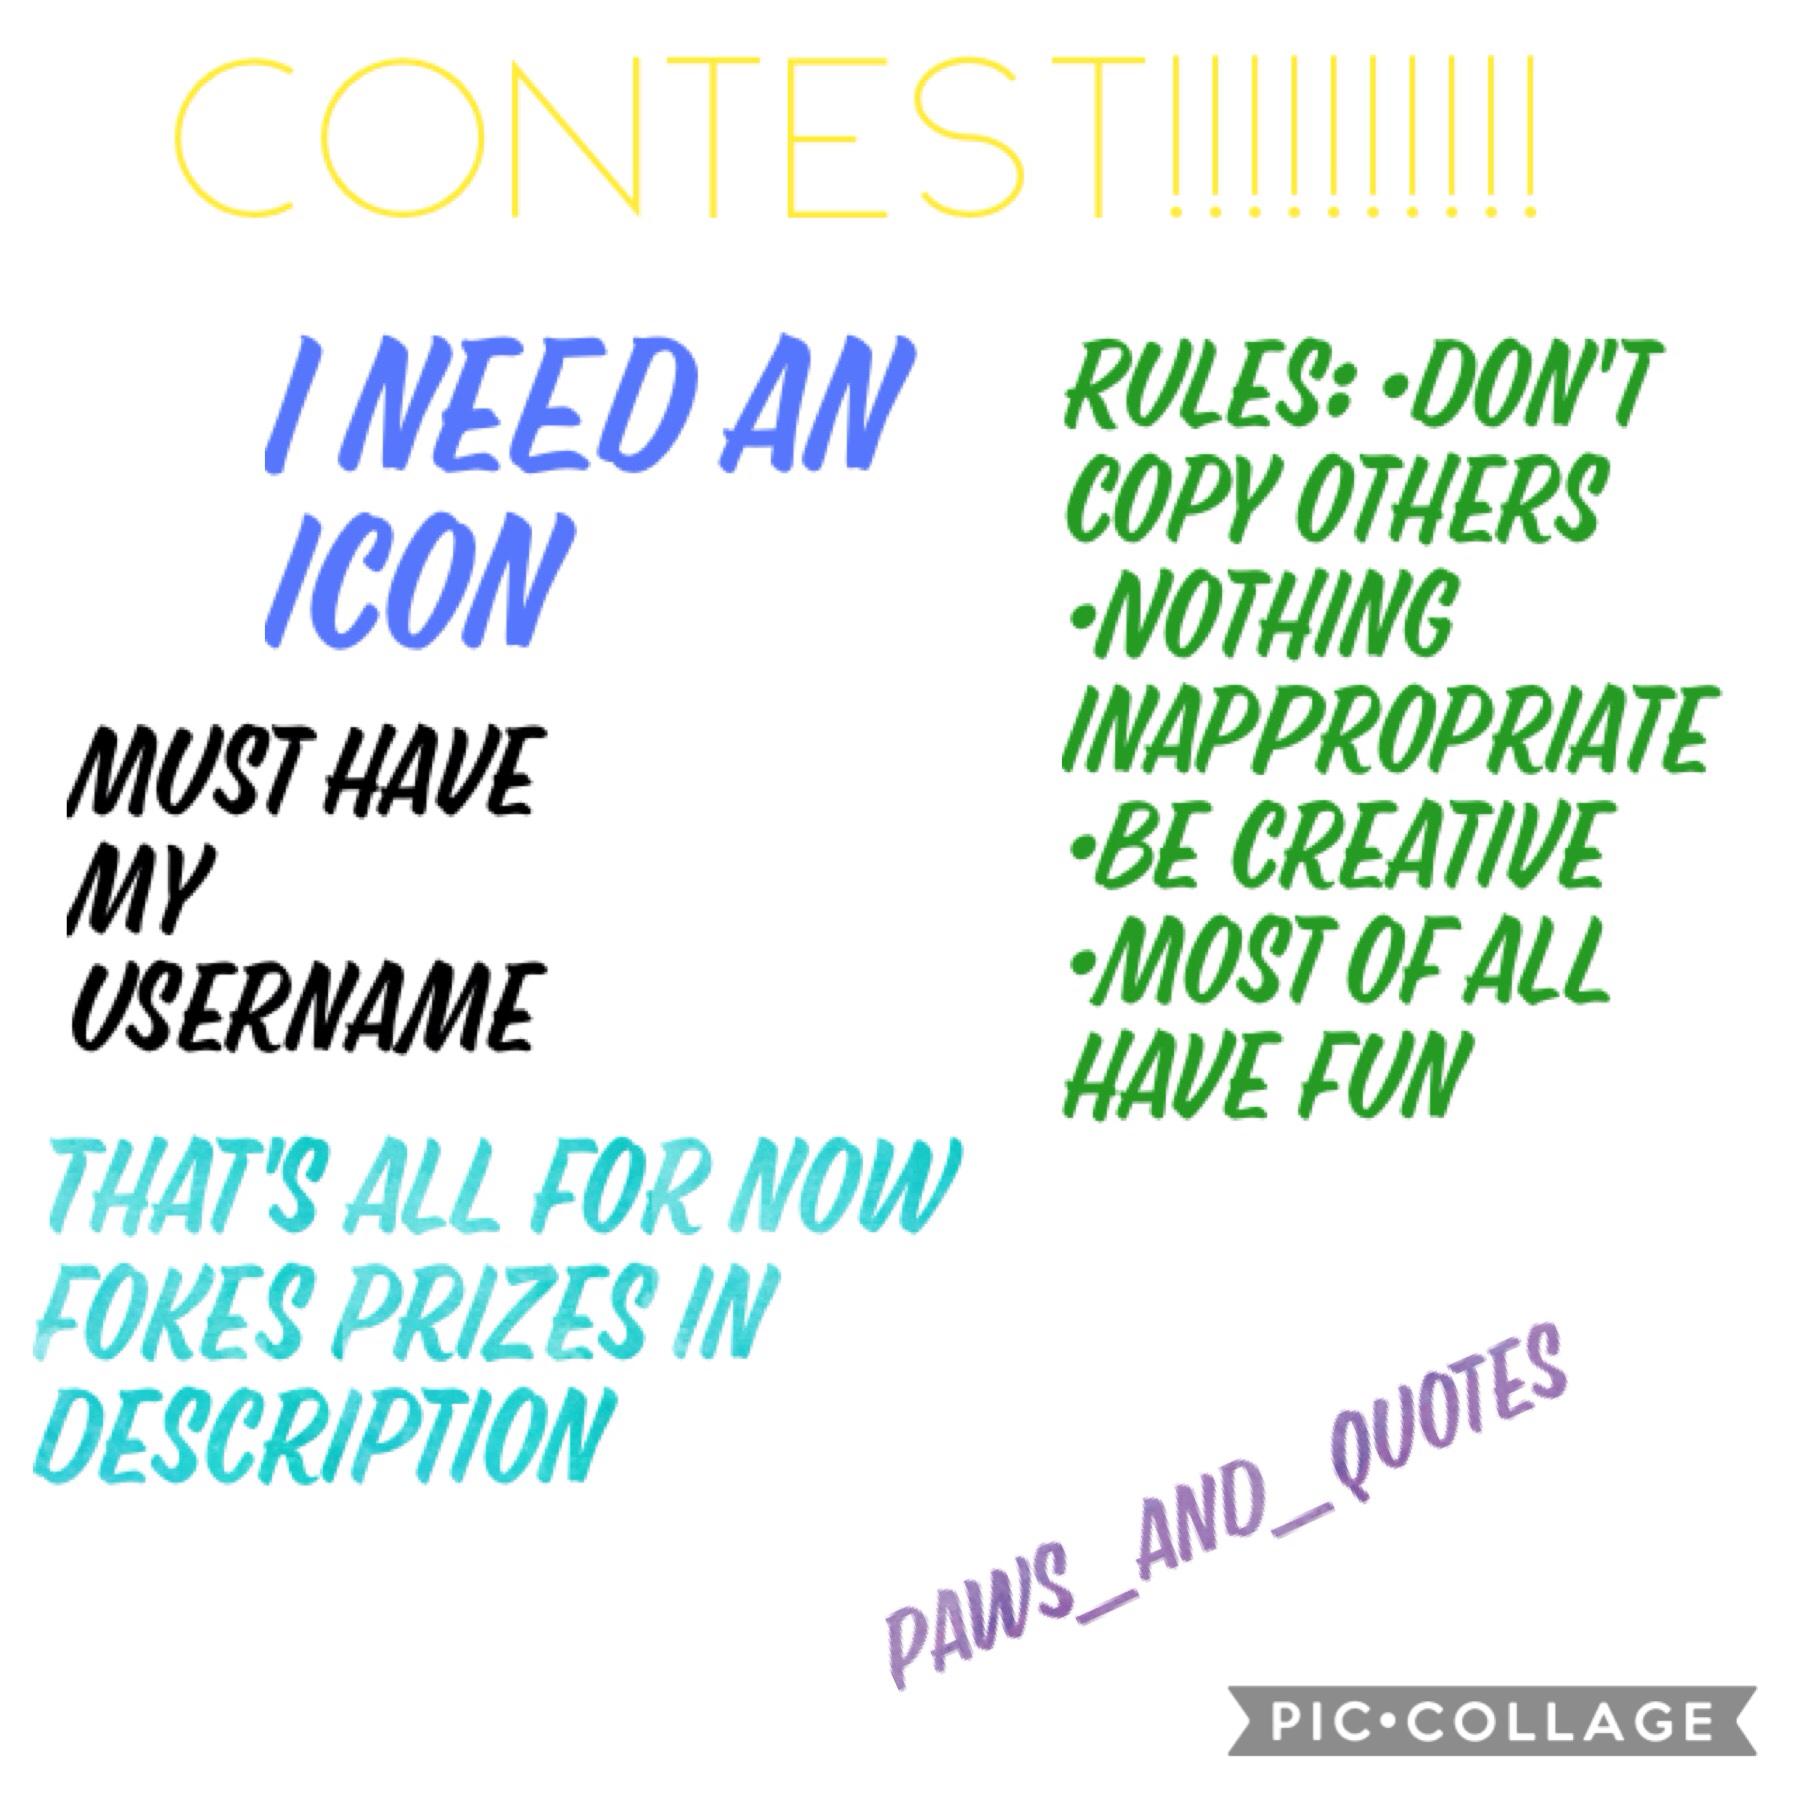 Tap for prizes

1. Your icon will be used, a follow, an edit or drawing by me, and a shout out
2. Drawing or edit, shoutout,and a follow
3. Drawing or edit shoutout 